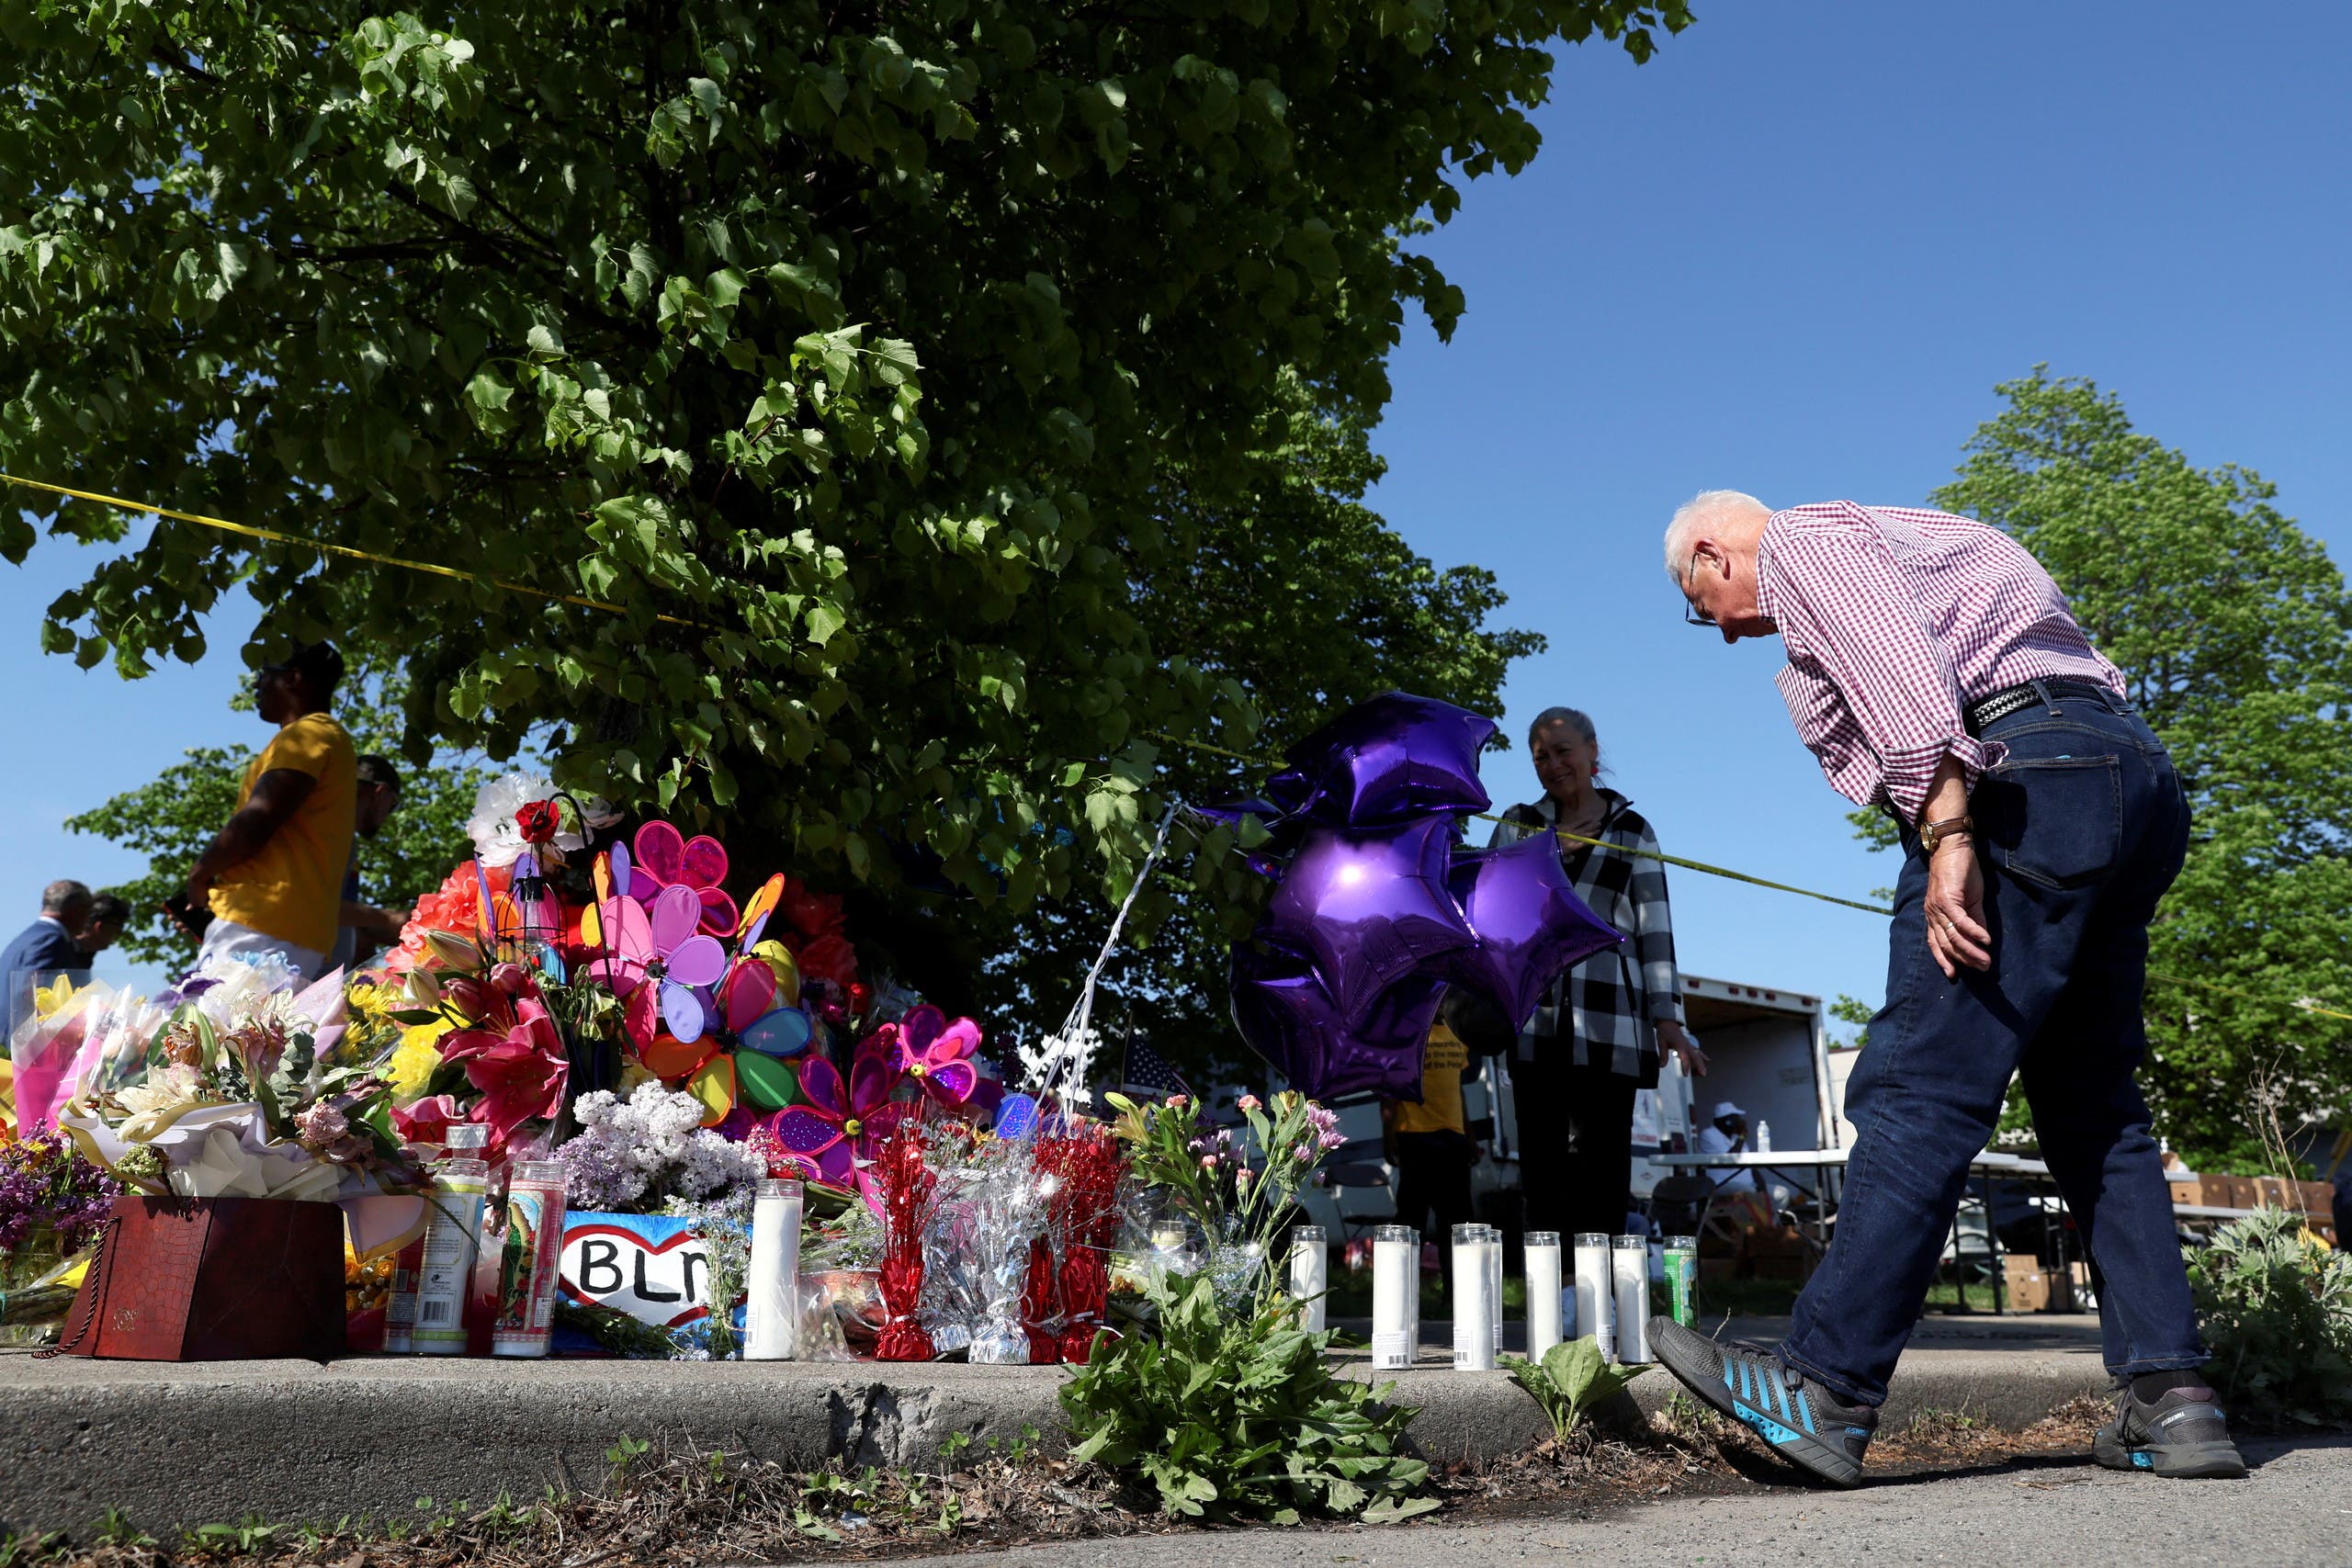 A man looks a memorial for victims near the scene of a shooting at a TOPS supermarket in Buffalo, New York, US May 15, 2022. (Reuters)